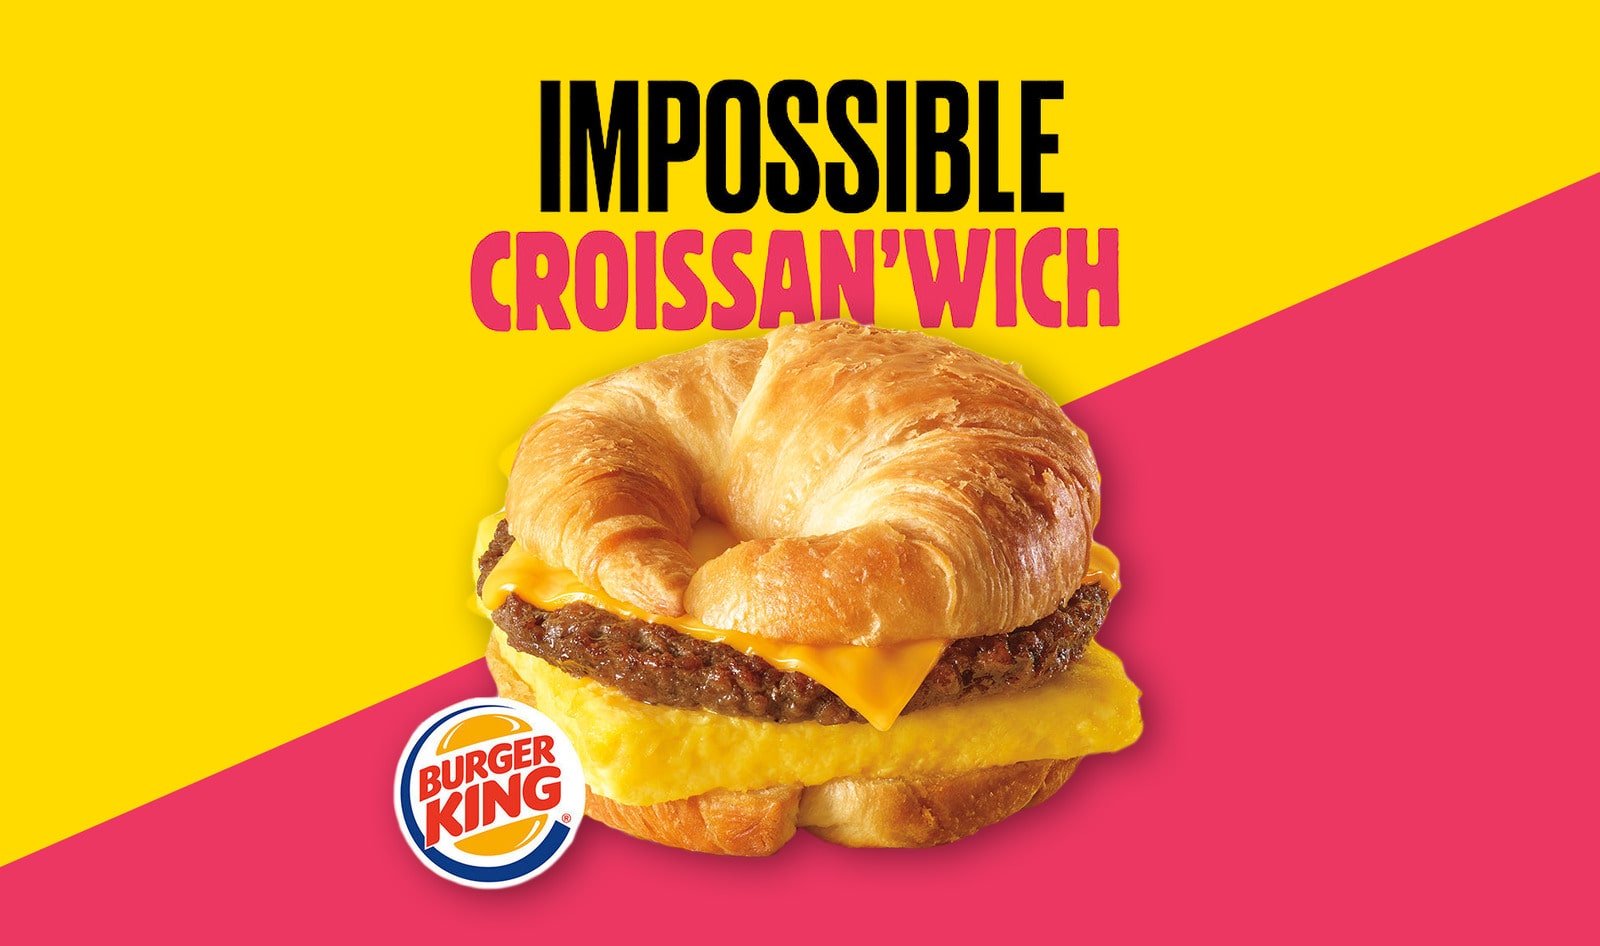 Burger King Launches Meatless Impossible Sausage Croissan’wich Nationwide